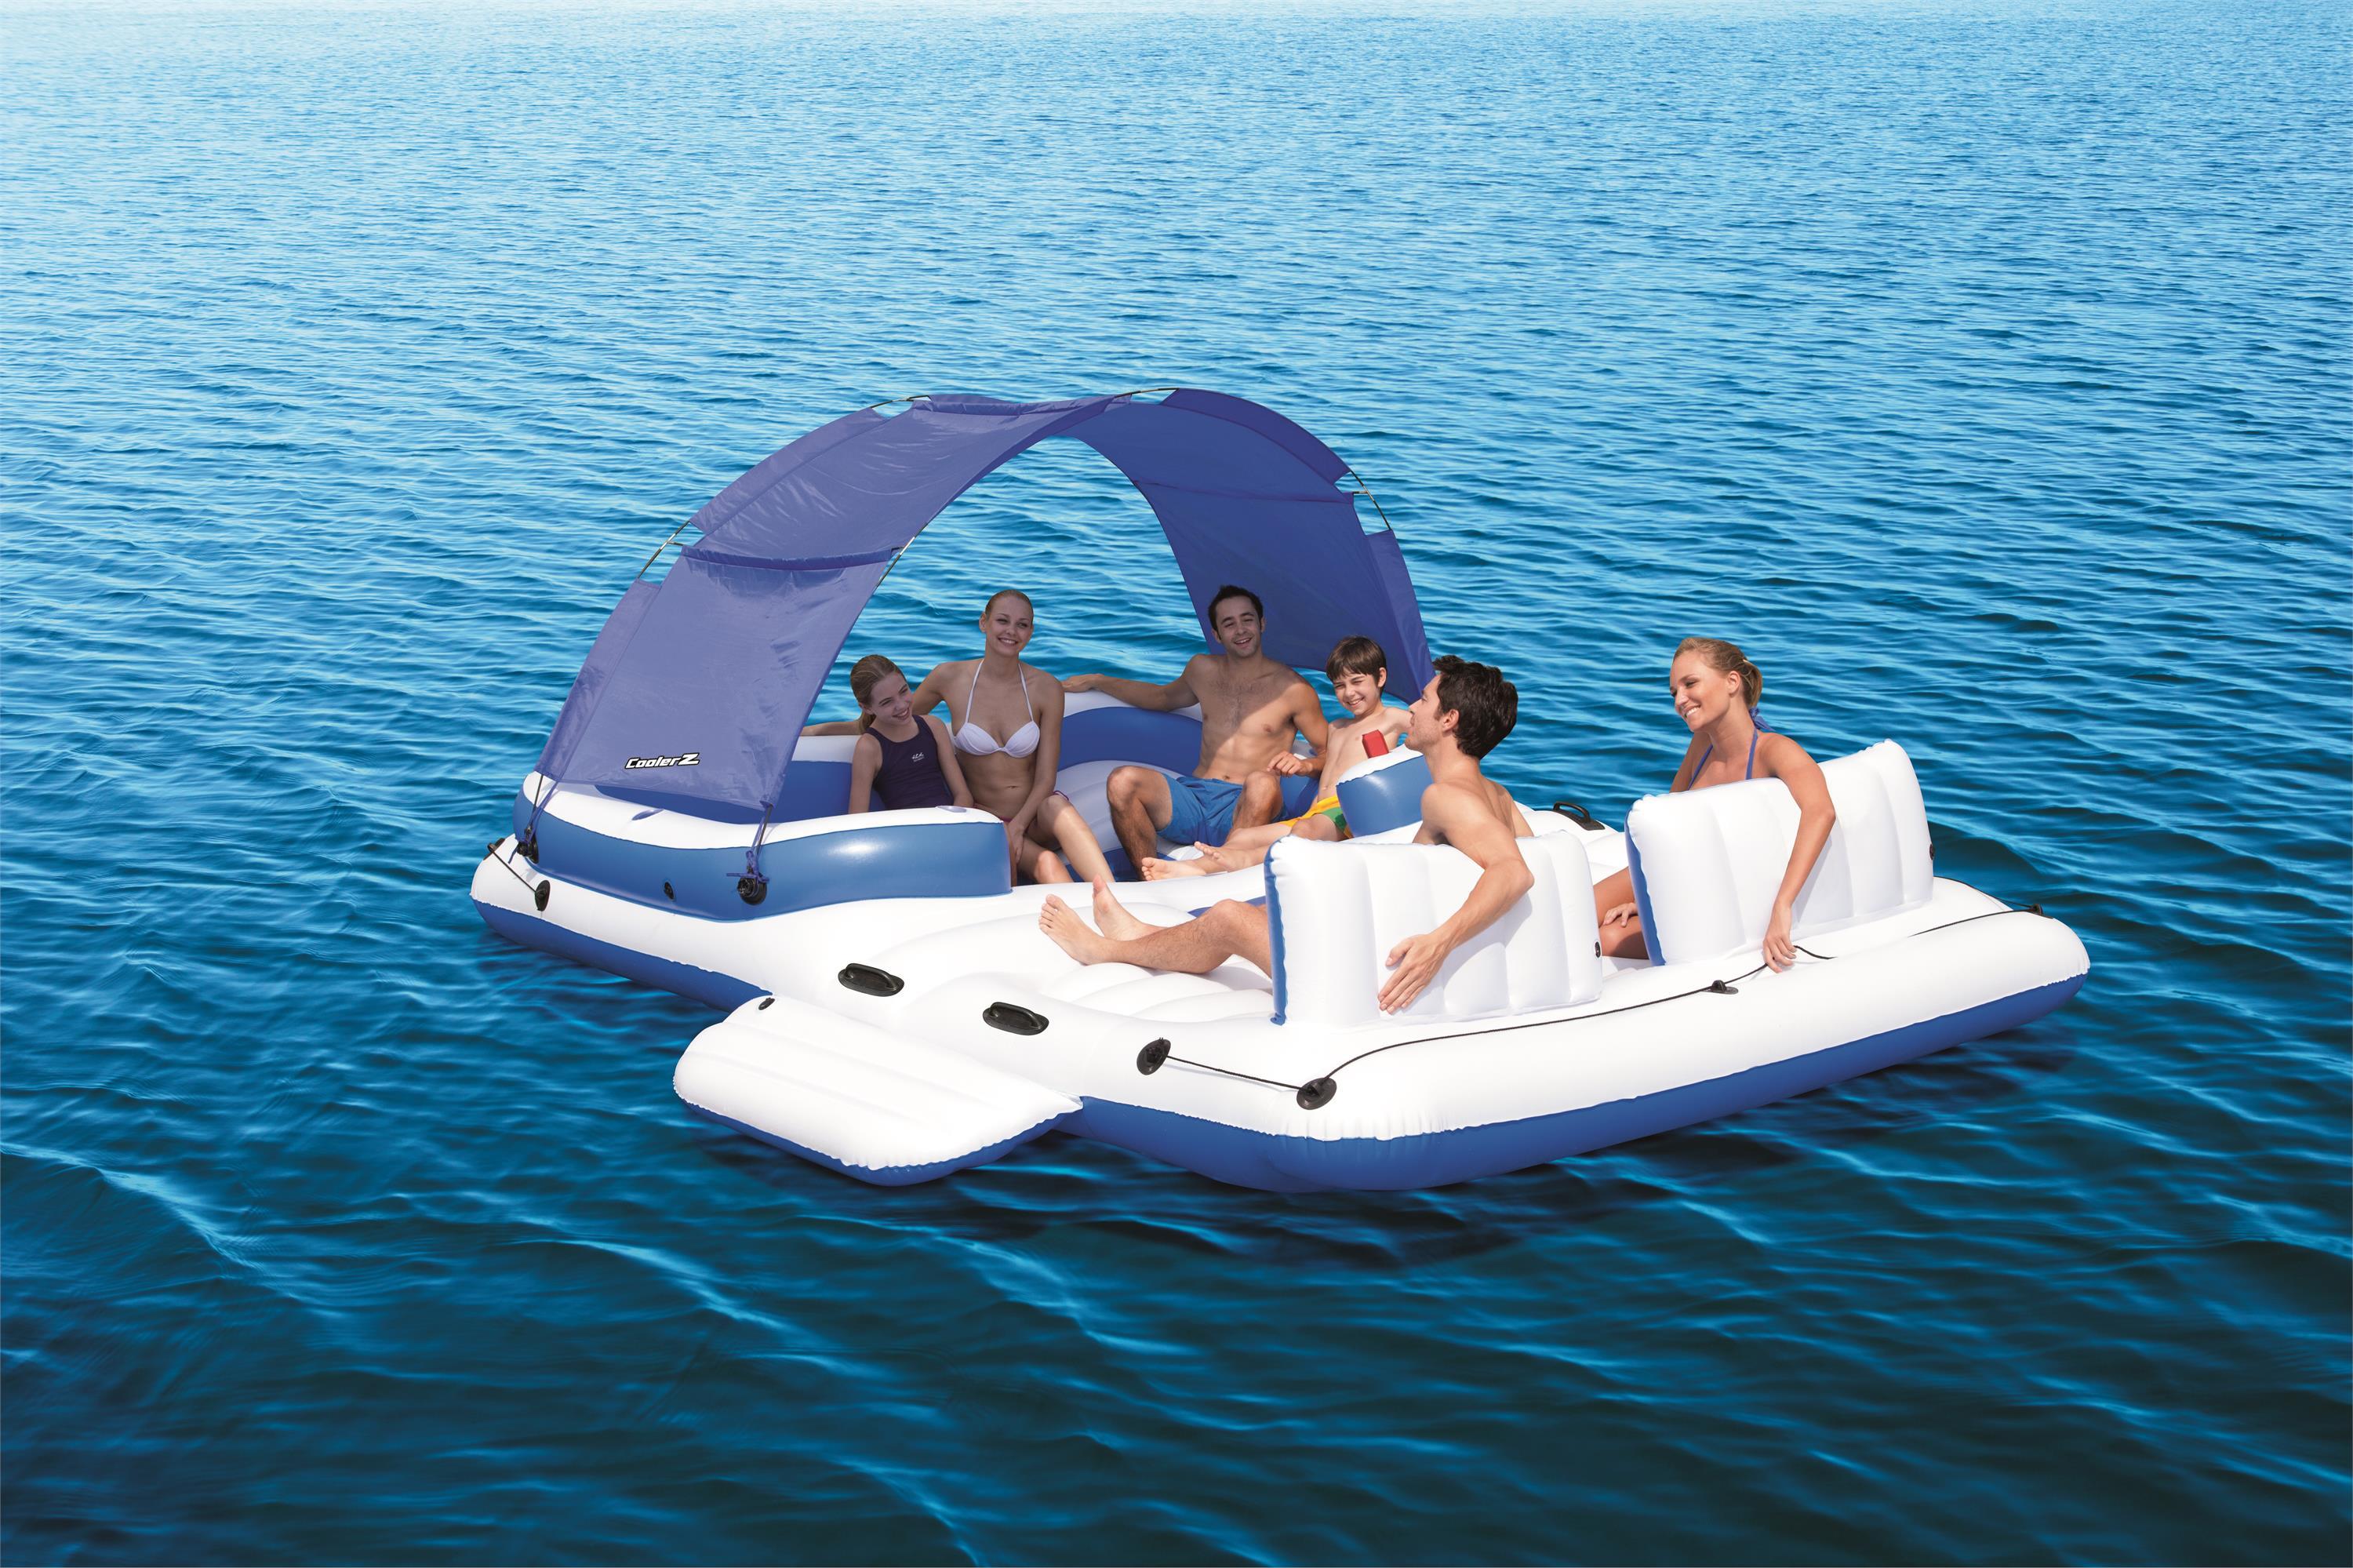 Multi-person floating island